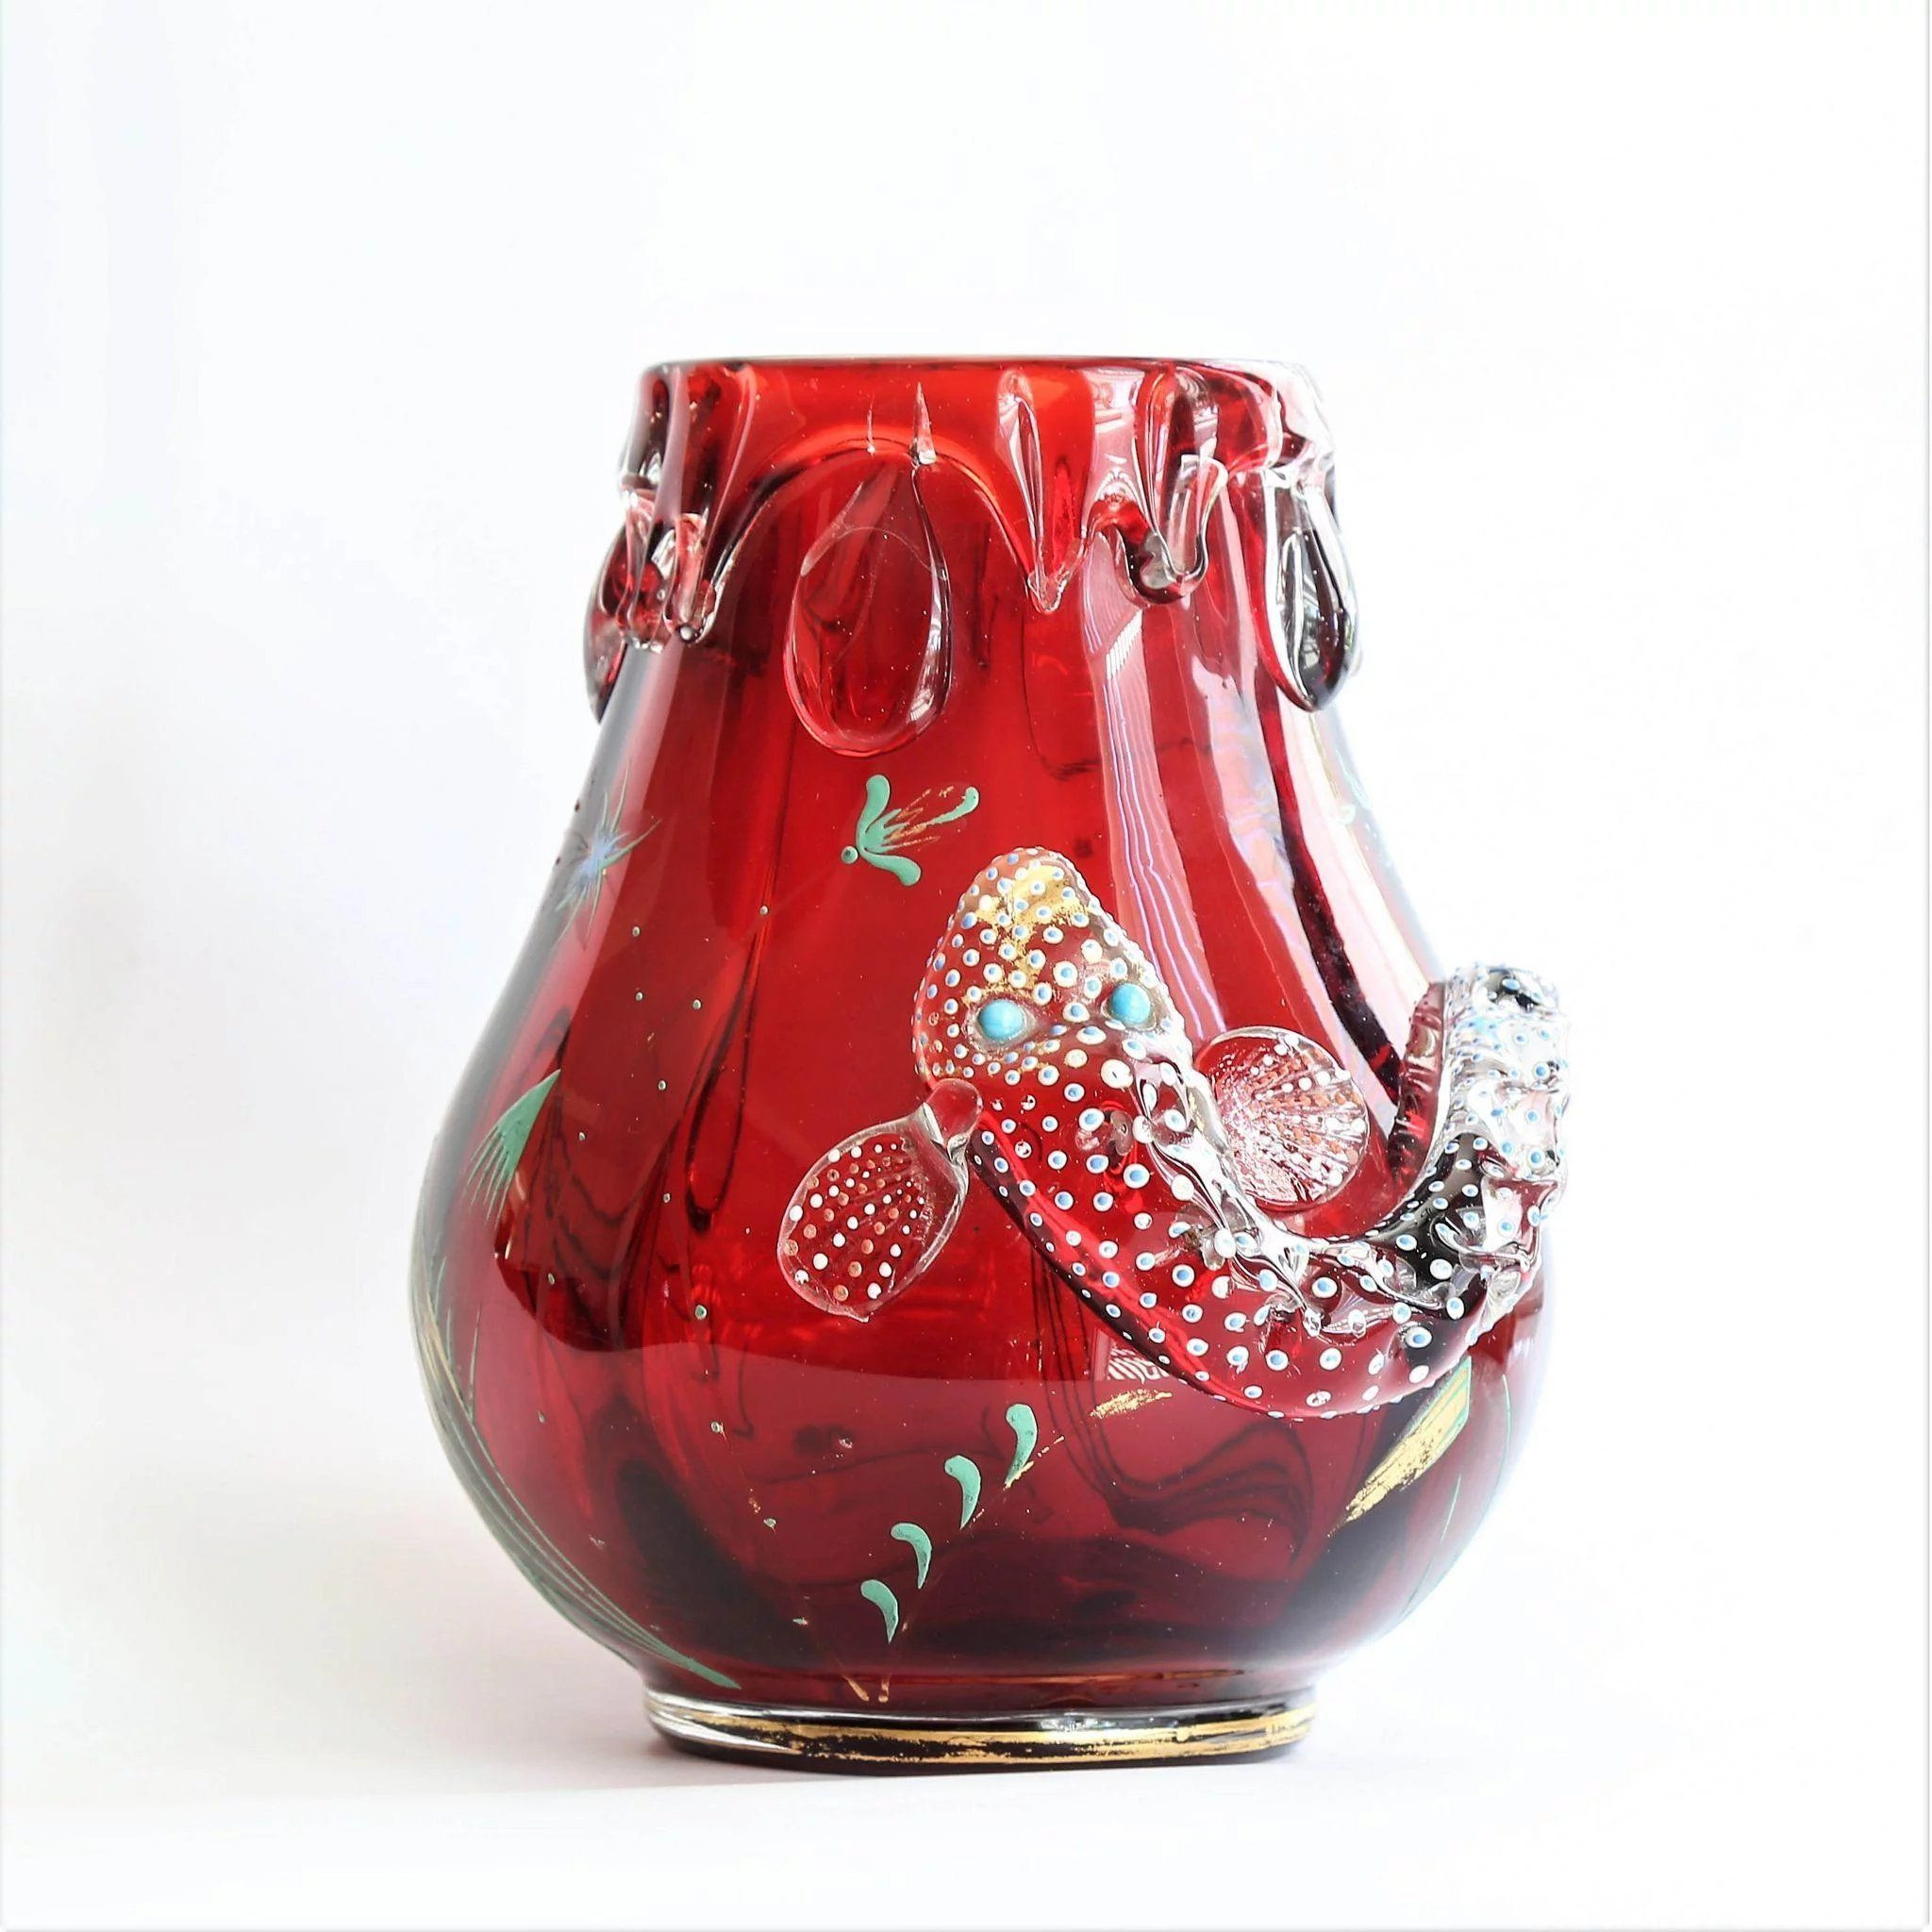 25 Best Large Glass Fish Vase 2024 free download large glass fish vase of rare circa 1900 moser ruby red vase with enameled fish in 2018 within title rare circa 1900 moser ruby red vase with enameled fish price 995 usd category antiquesby 